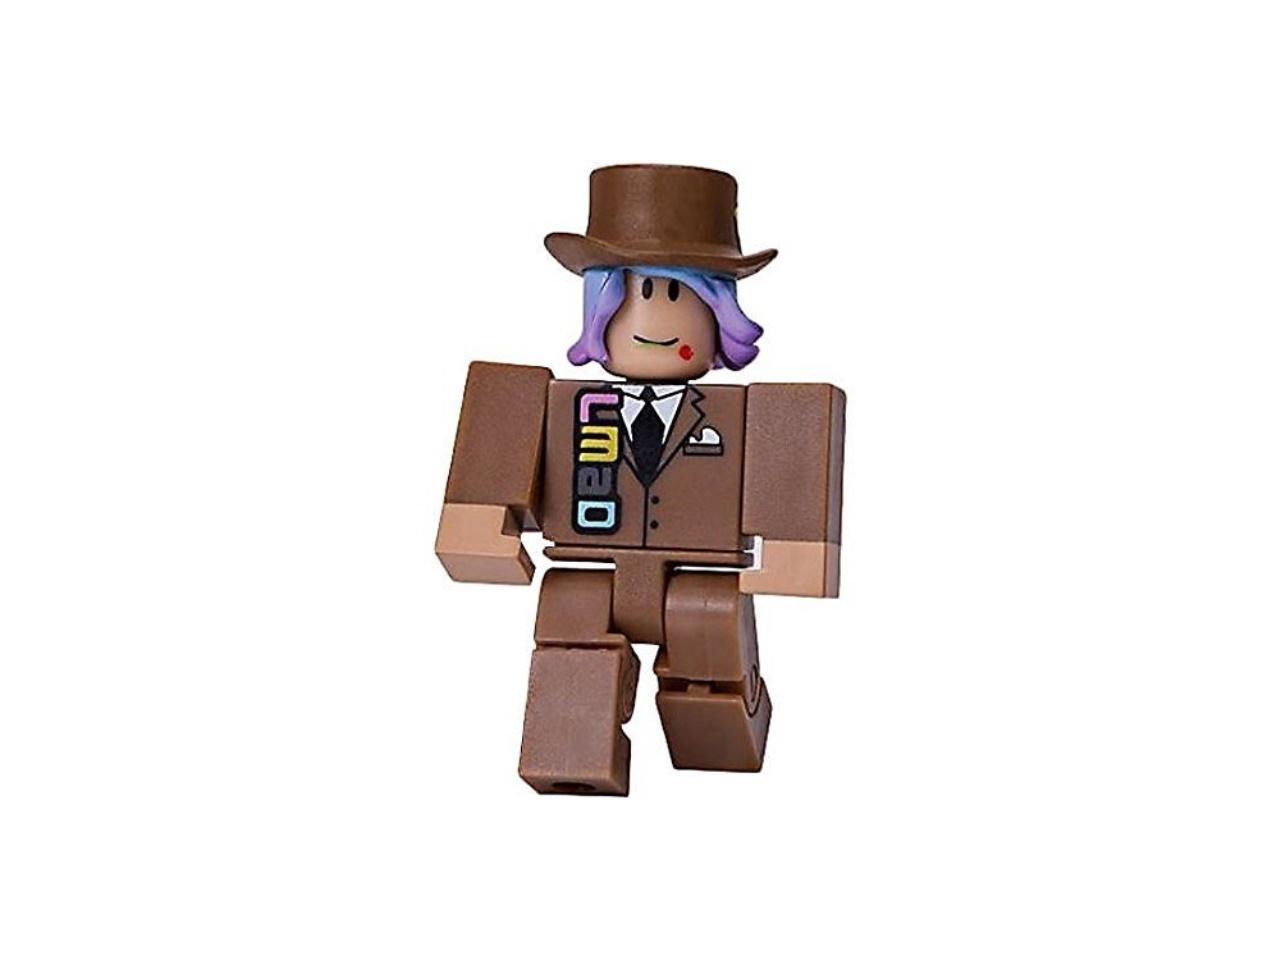 Roblox Series 1 Let S Make A Deal Action Figure Mystery Box Virtual Item Code 2 5 Newegg Com - roblox roblox series 1 lets make a deal action figure